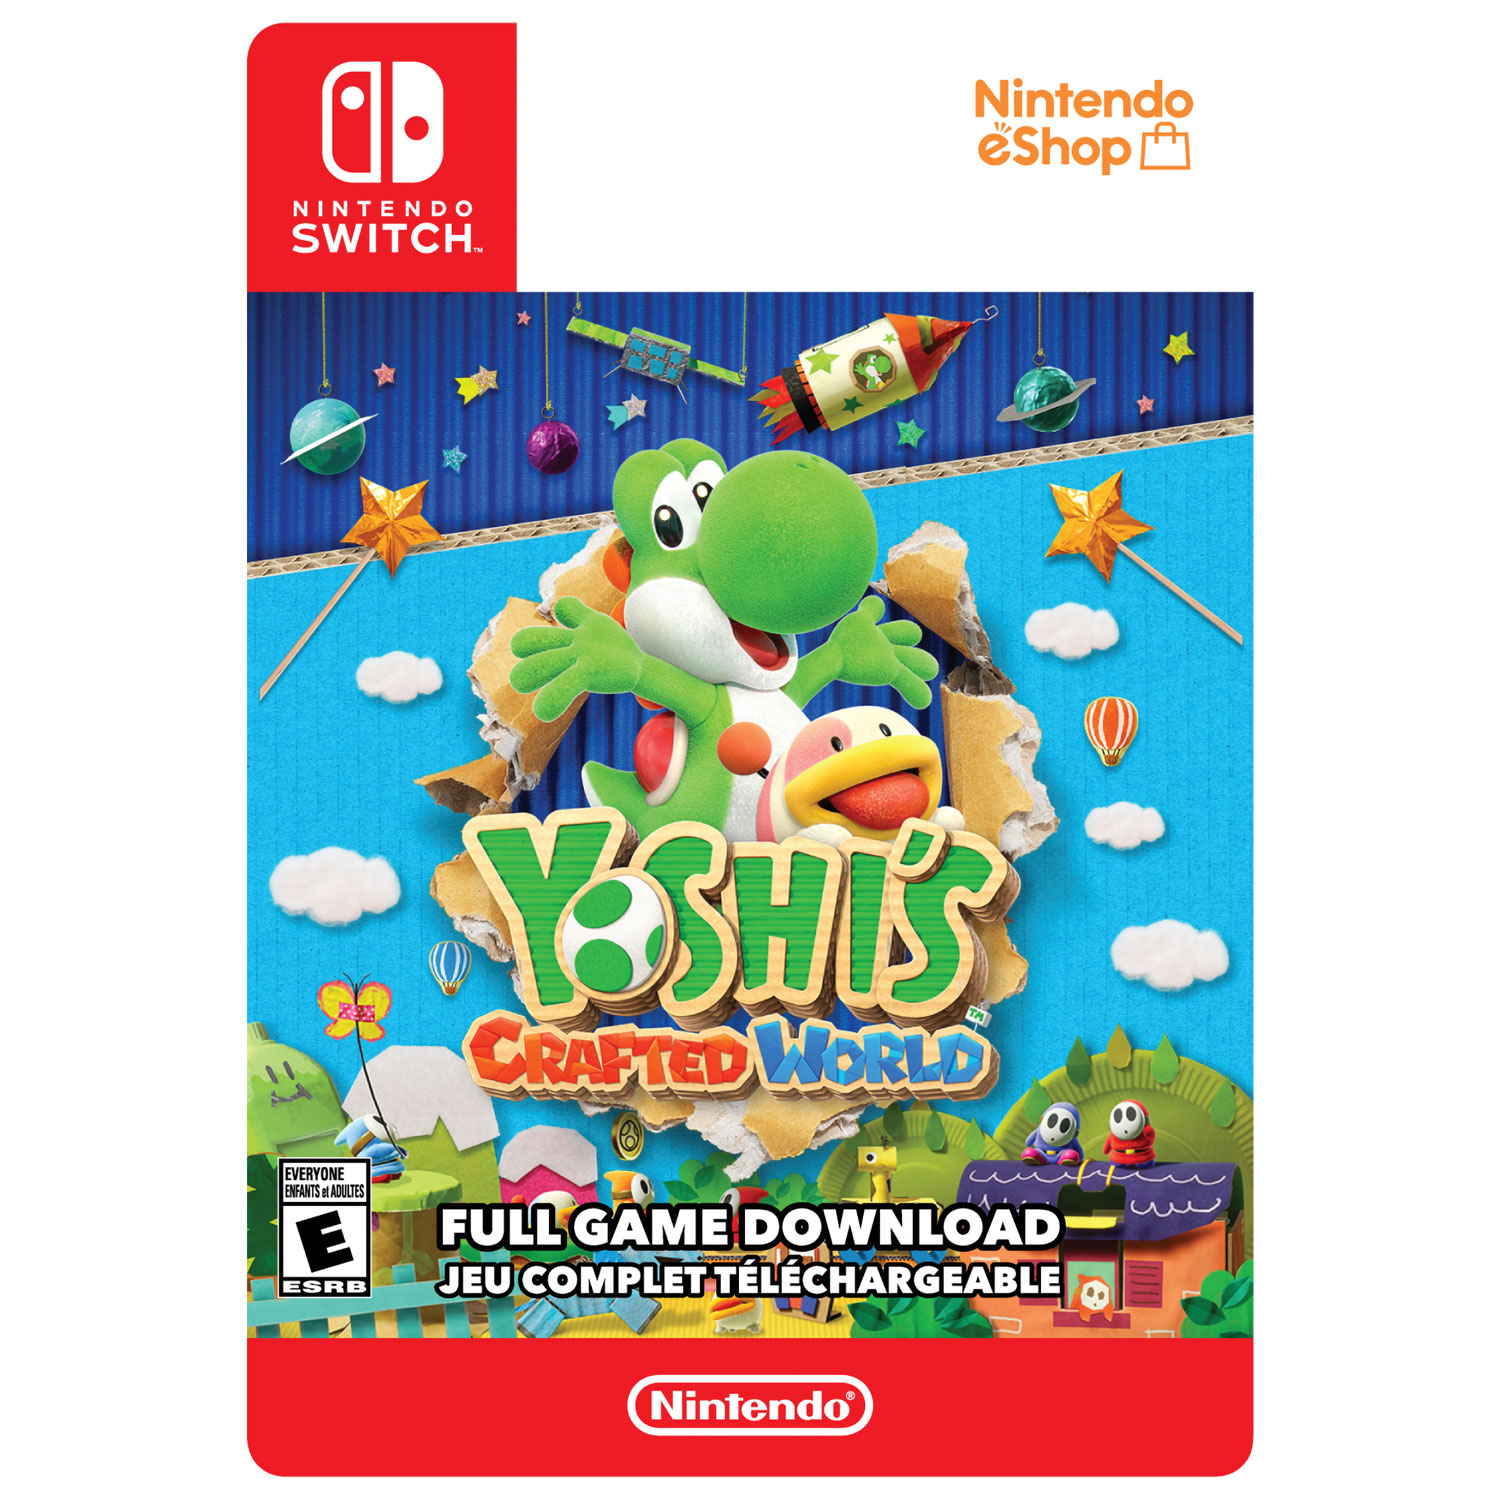 Yoshi's Crafted World (Switch) - Digital Download